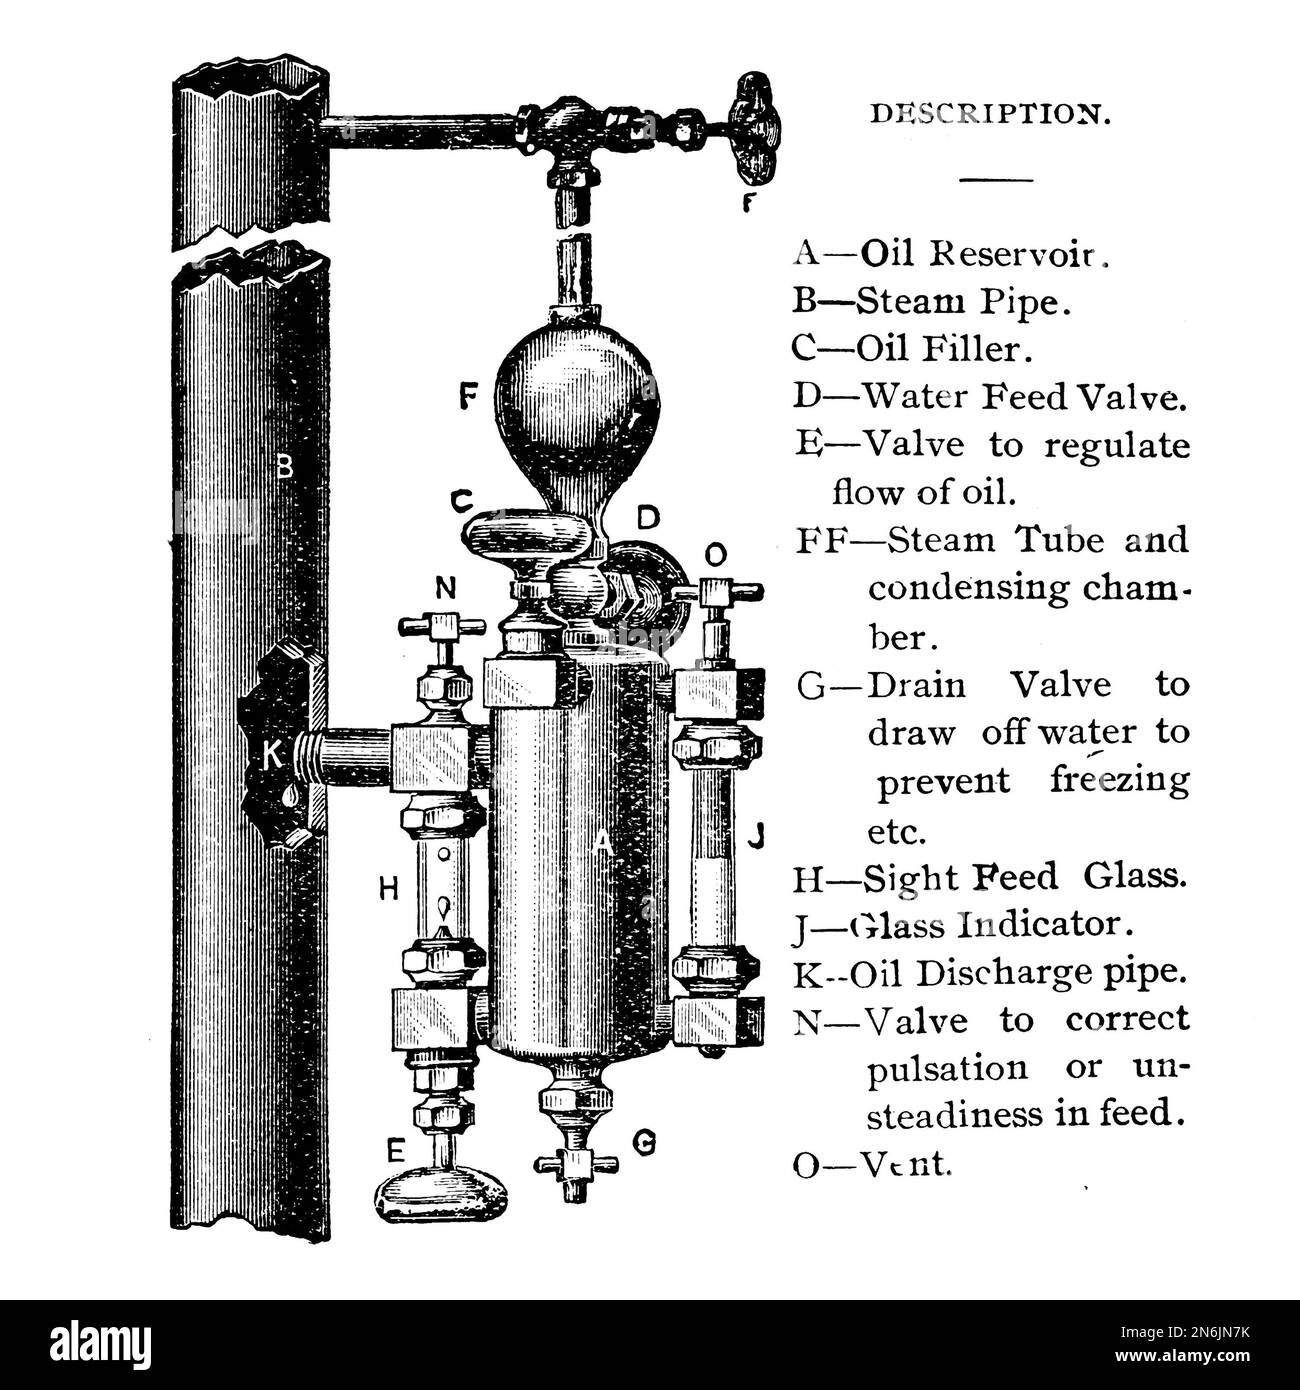 Steam Engine governor A — Oil Reservoir. B— Steam Pipe. C— Oil Filler. D— Water Feed Valve. E — Valve to regulate flow of oil. FF— Steam Tube and condensing chamber. G— Drain Valve to draw off water to prevent freezing etc. H— Sight Feed Glass. j — Glass Indicator. K-Oil Discharge pipe. N — Valve to correct pulsation or un- steadiness in feed. O— Vent From Otto Stephenson's illustrated practical test, examination and ready reference book for stationary, locomotive and marine engineers, firemen, electricians and machinists, to procure steam engineer's licence Published in Chicago, W. G. Kraft i Stock Photo